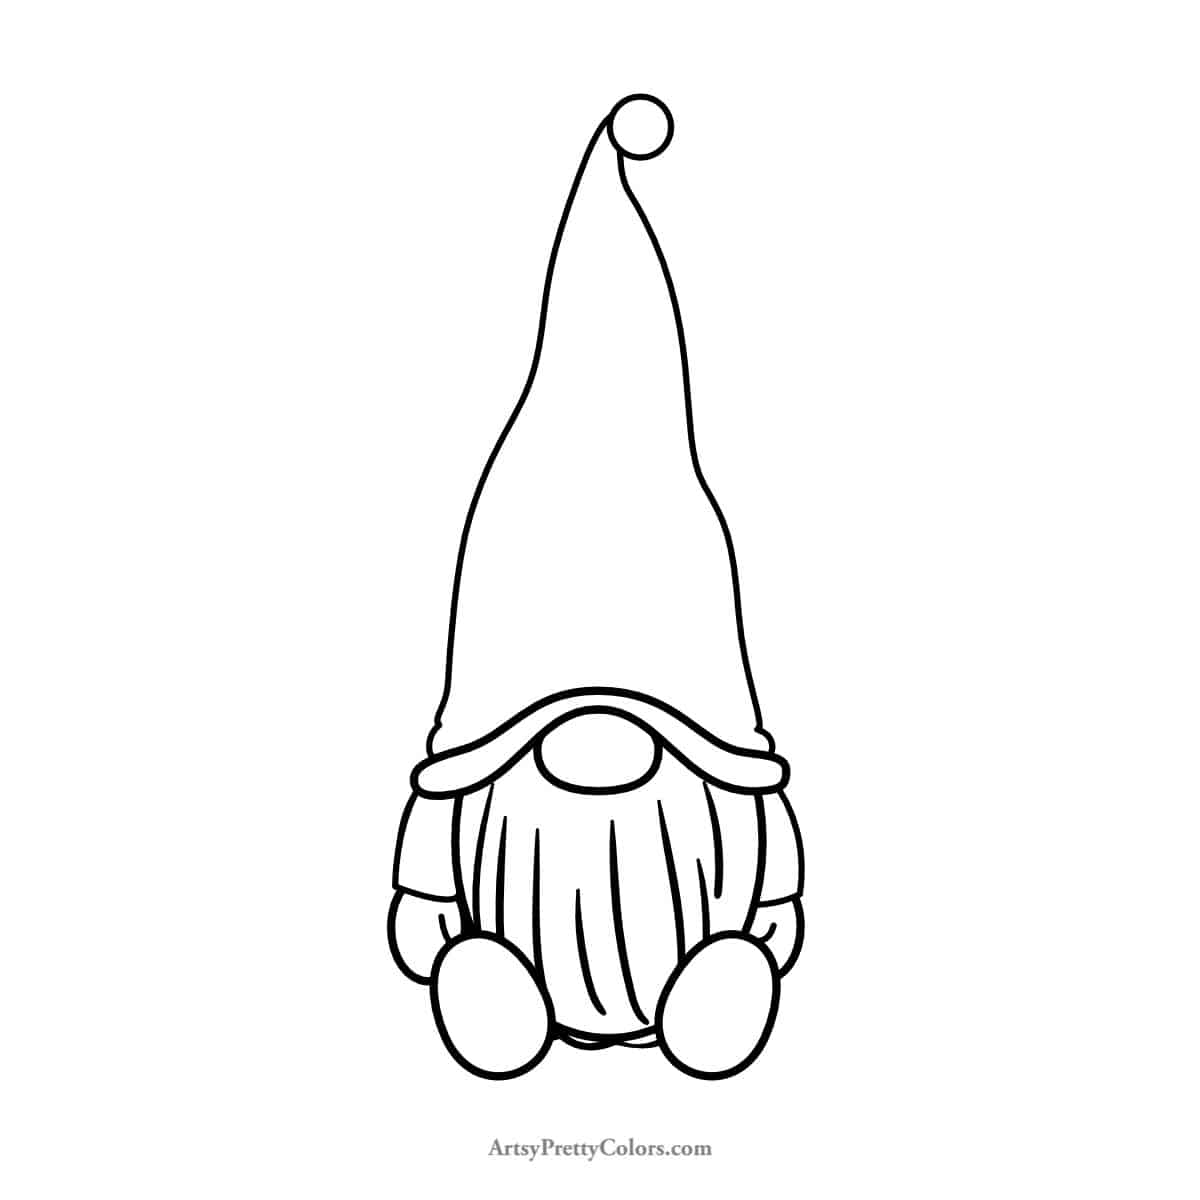 a finished line drawing of a gnome